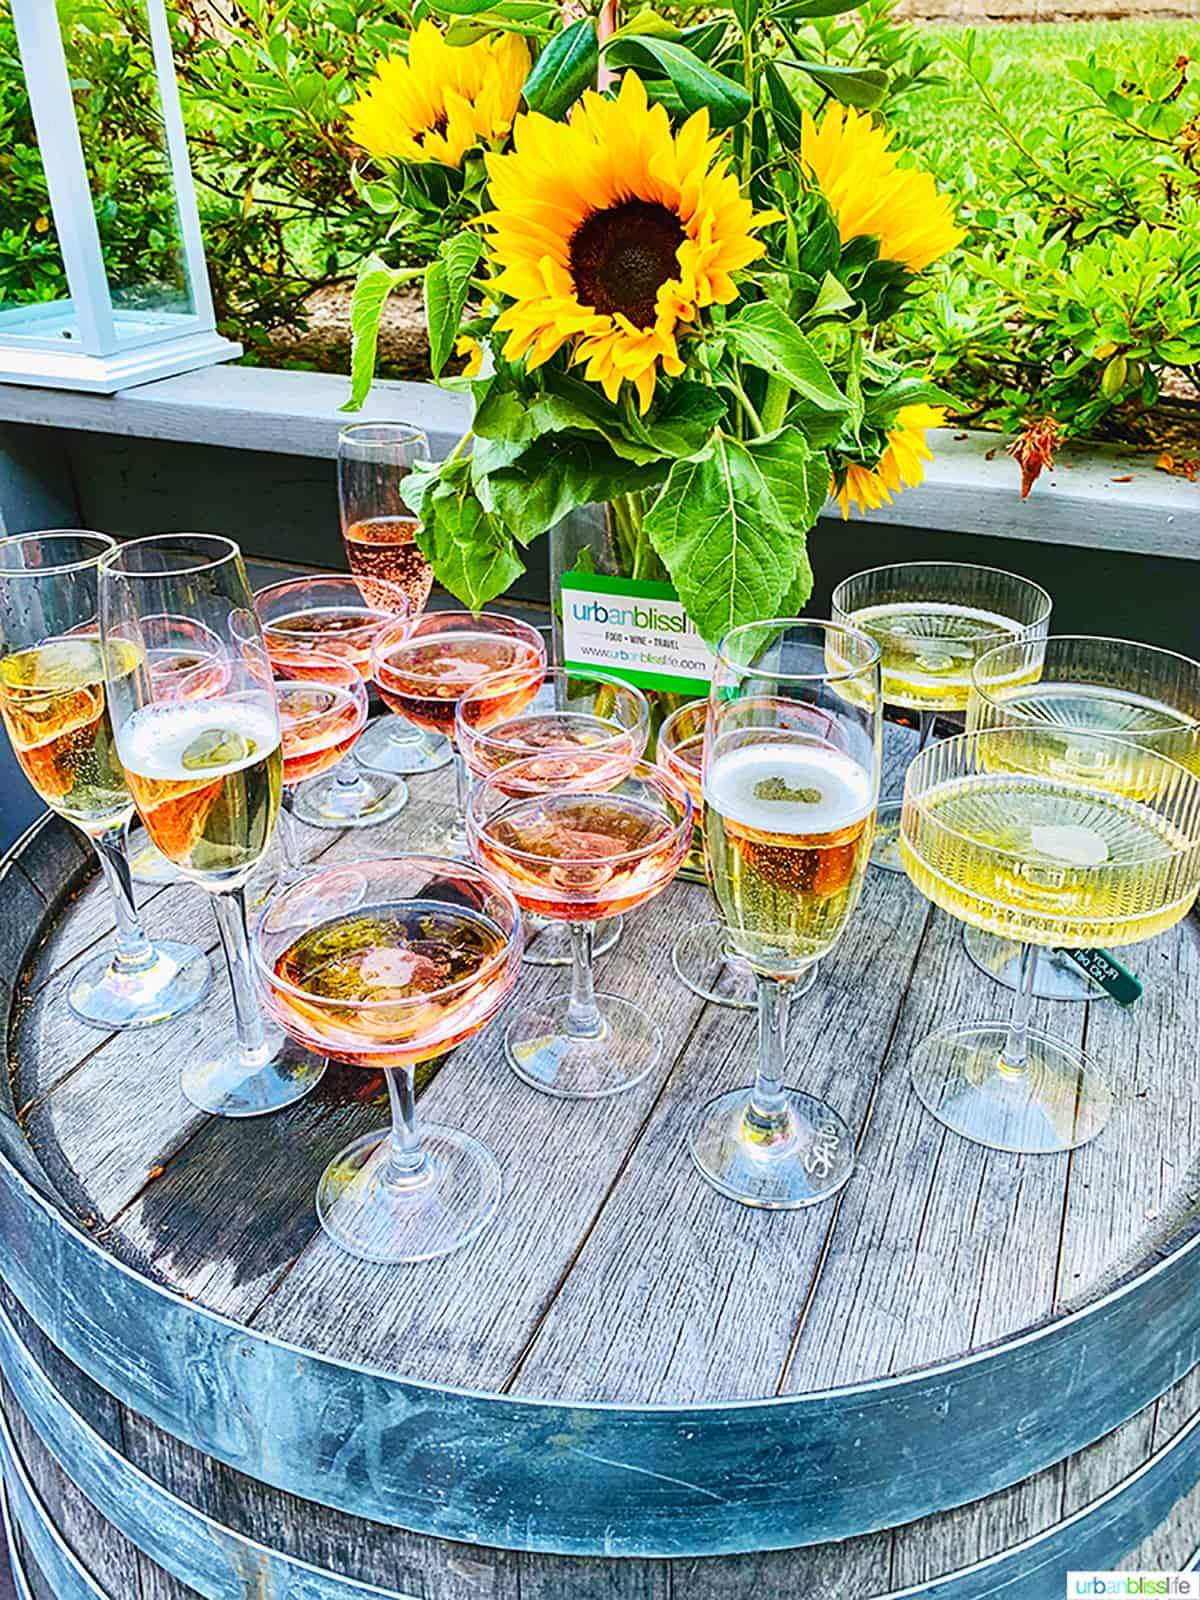 several glasses of rosé wine and Champagne on a wine barrel with vase of sunflowers.